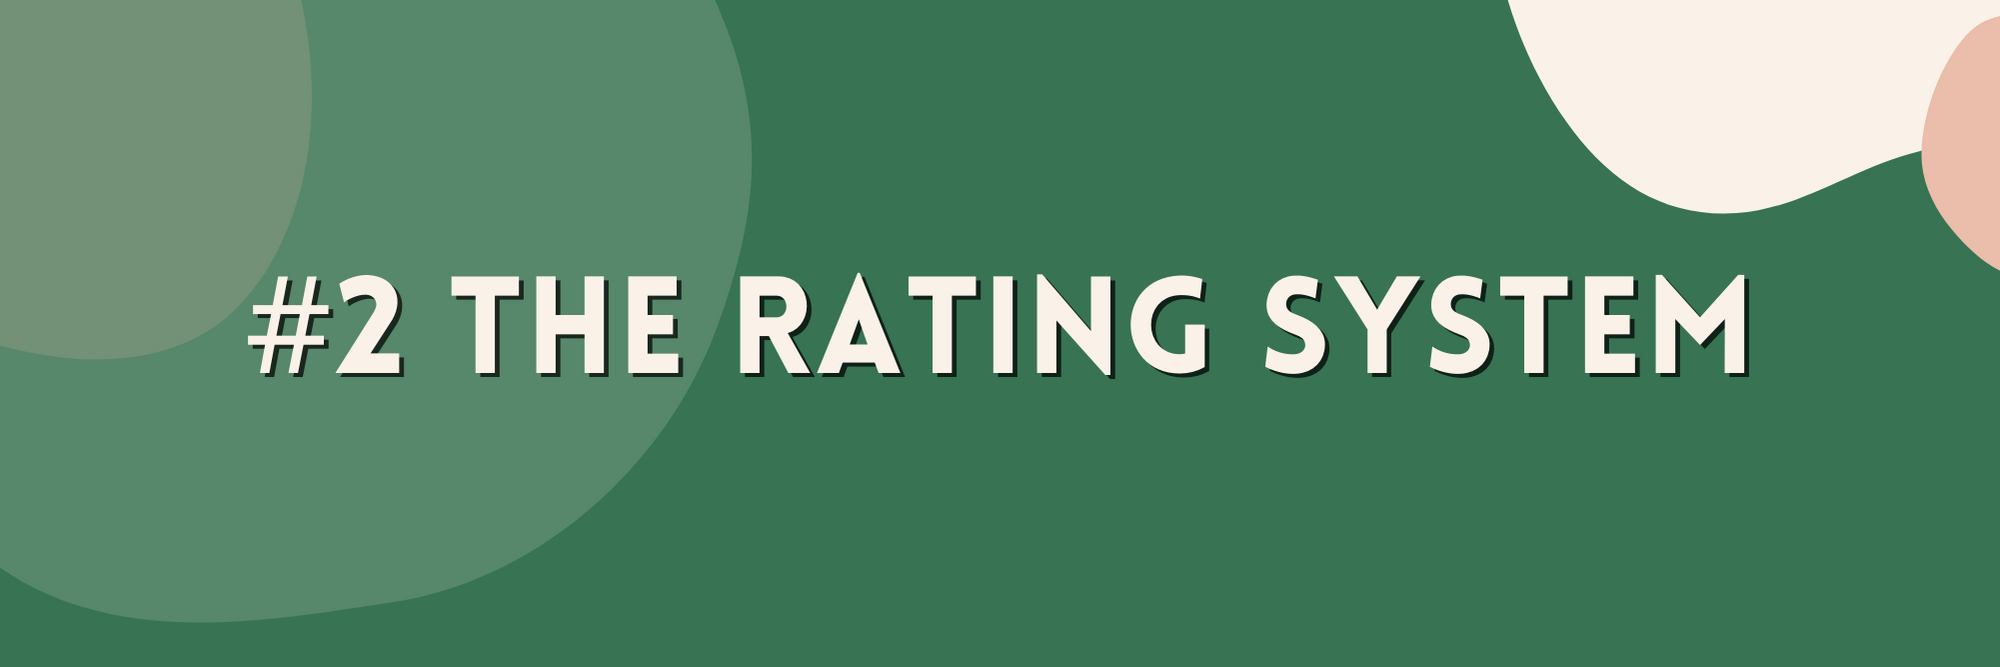 the rating system